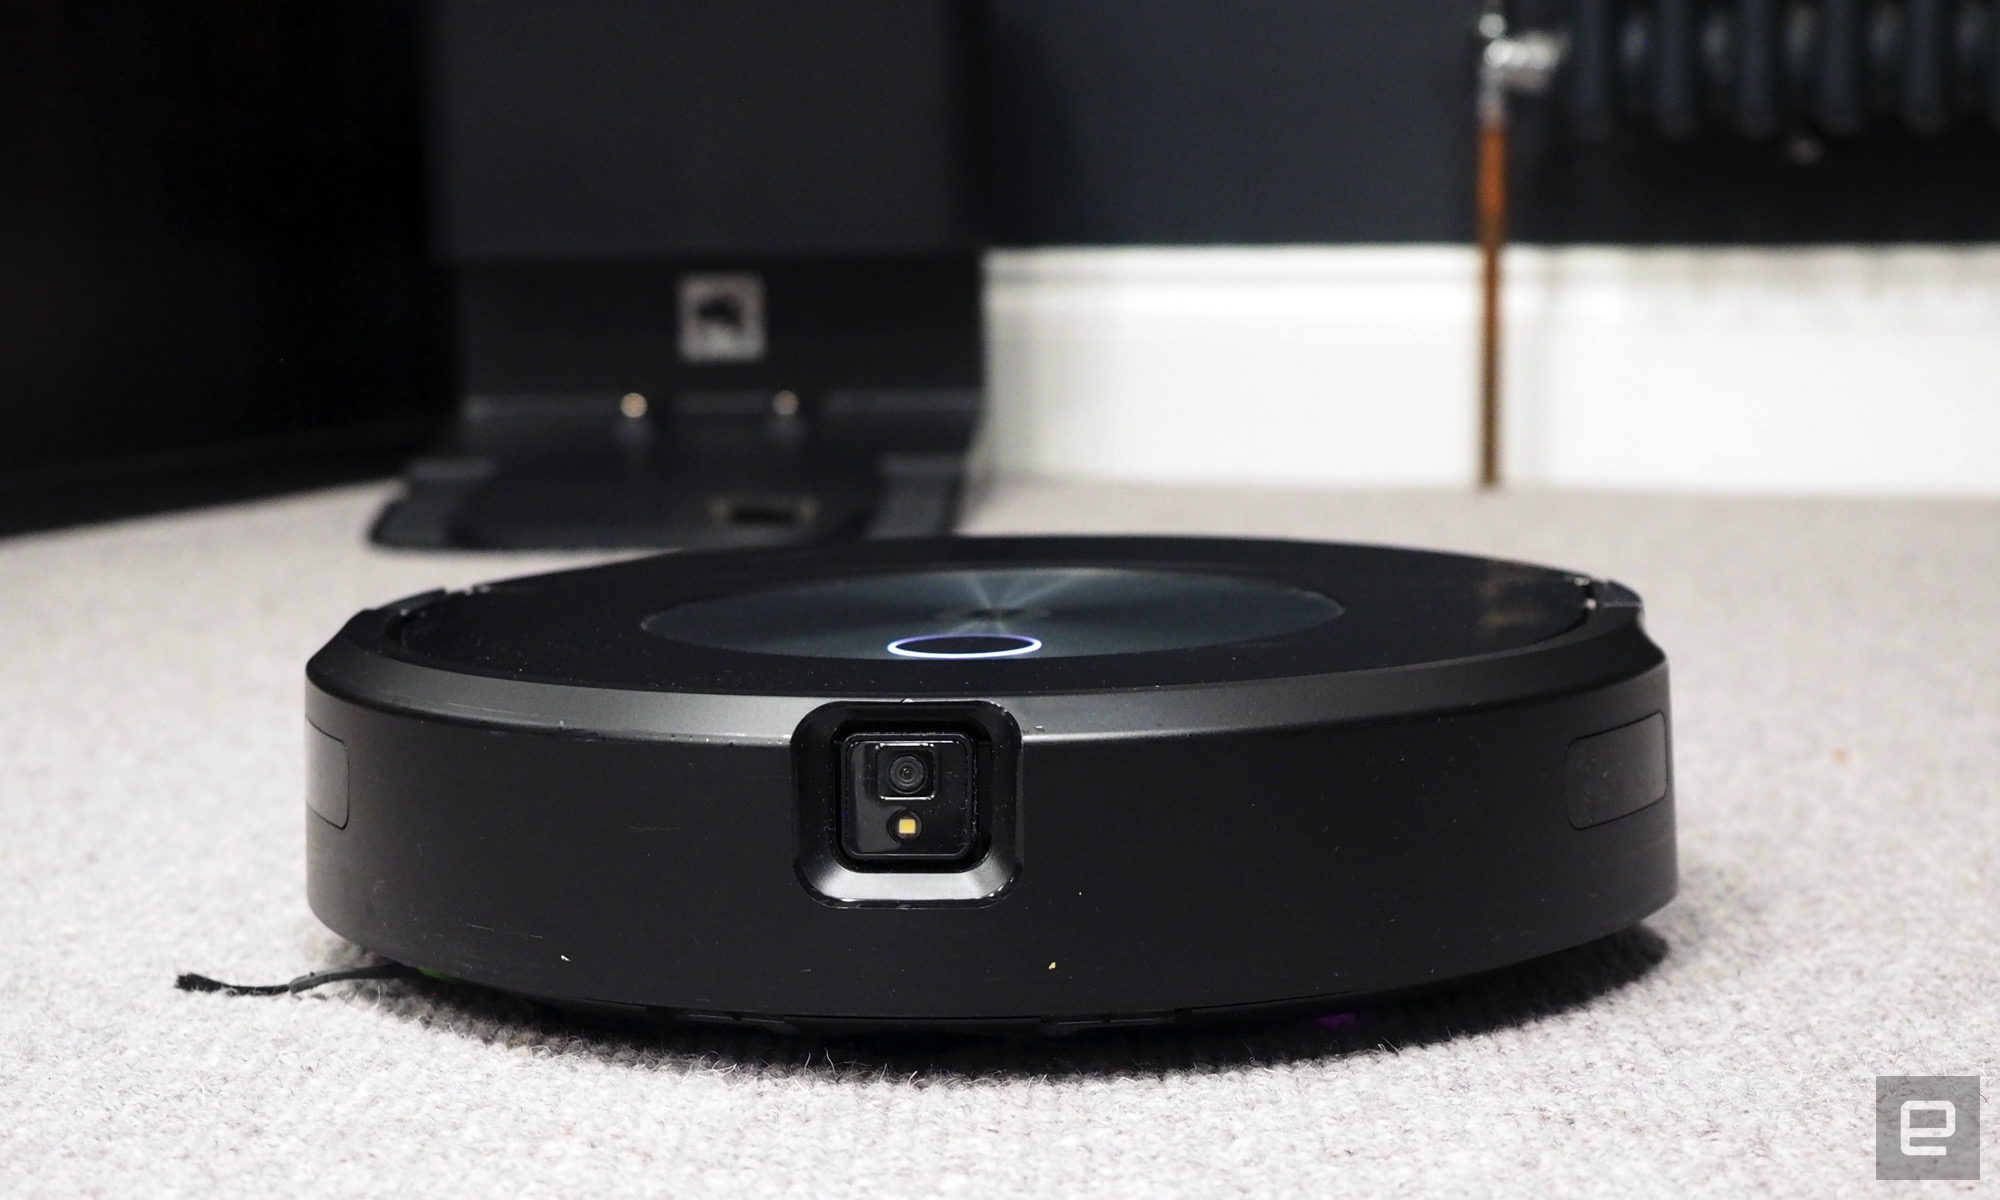 iRobot’s flagship Roomba Combo J7+ earned its place in my smart home | DeviceDaily.com